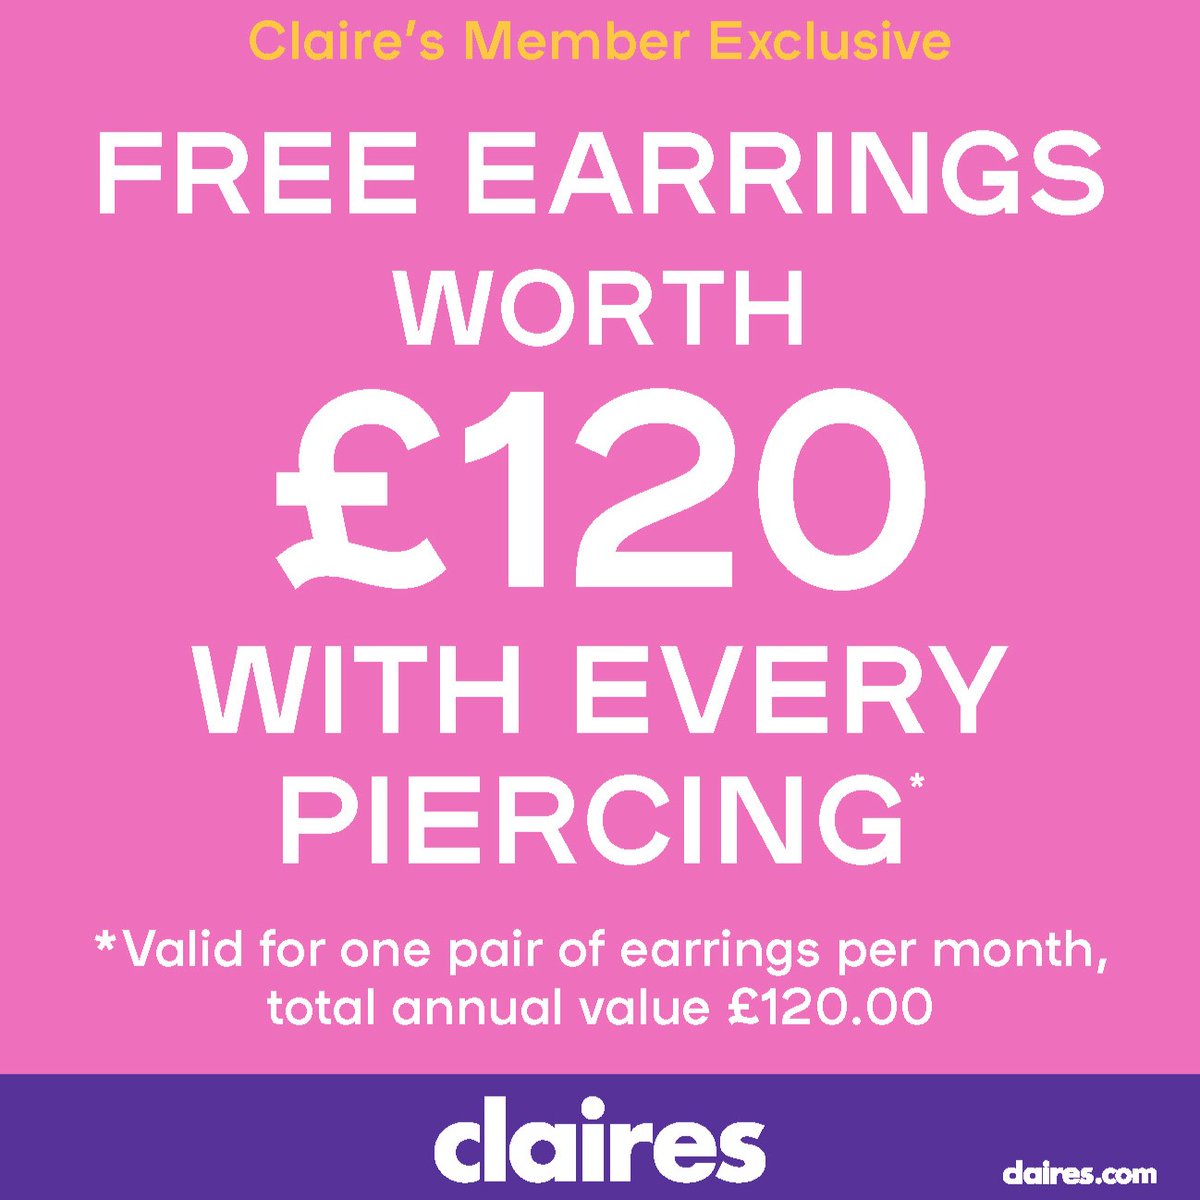 Join @claires for a Piercing Party on Thursday 30th May and Saturday 1st June and receive free earrings worth £120 with every piercing! Plus there will be goody bags, sparkle makeovers and sweet treats for shoppers when they get a piercing in store.